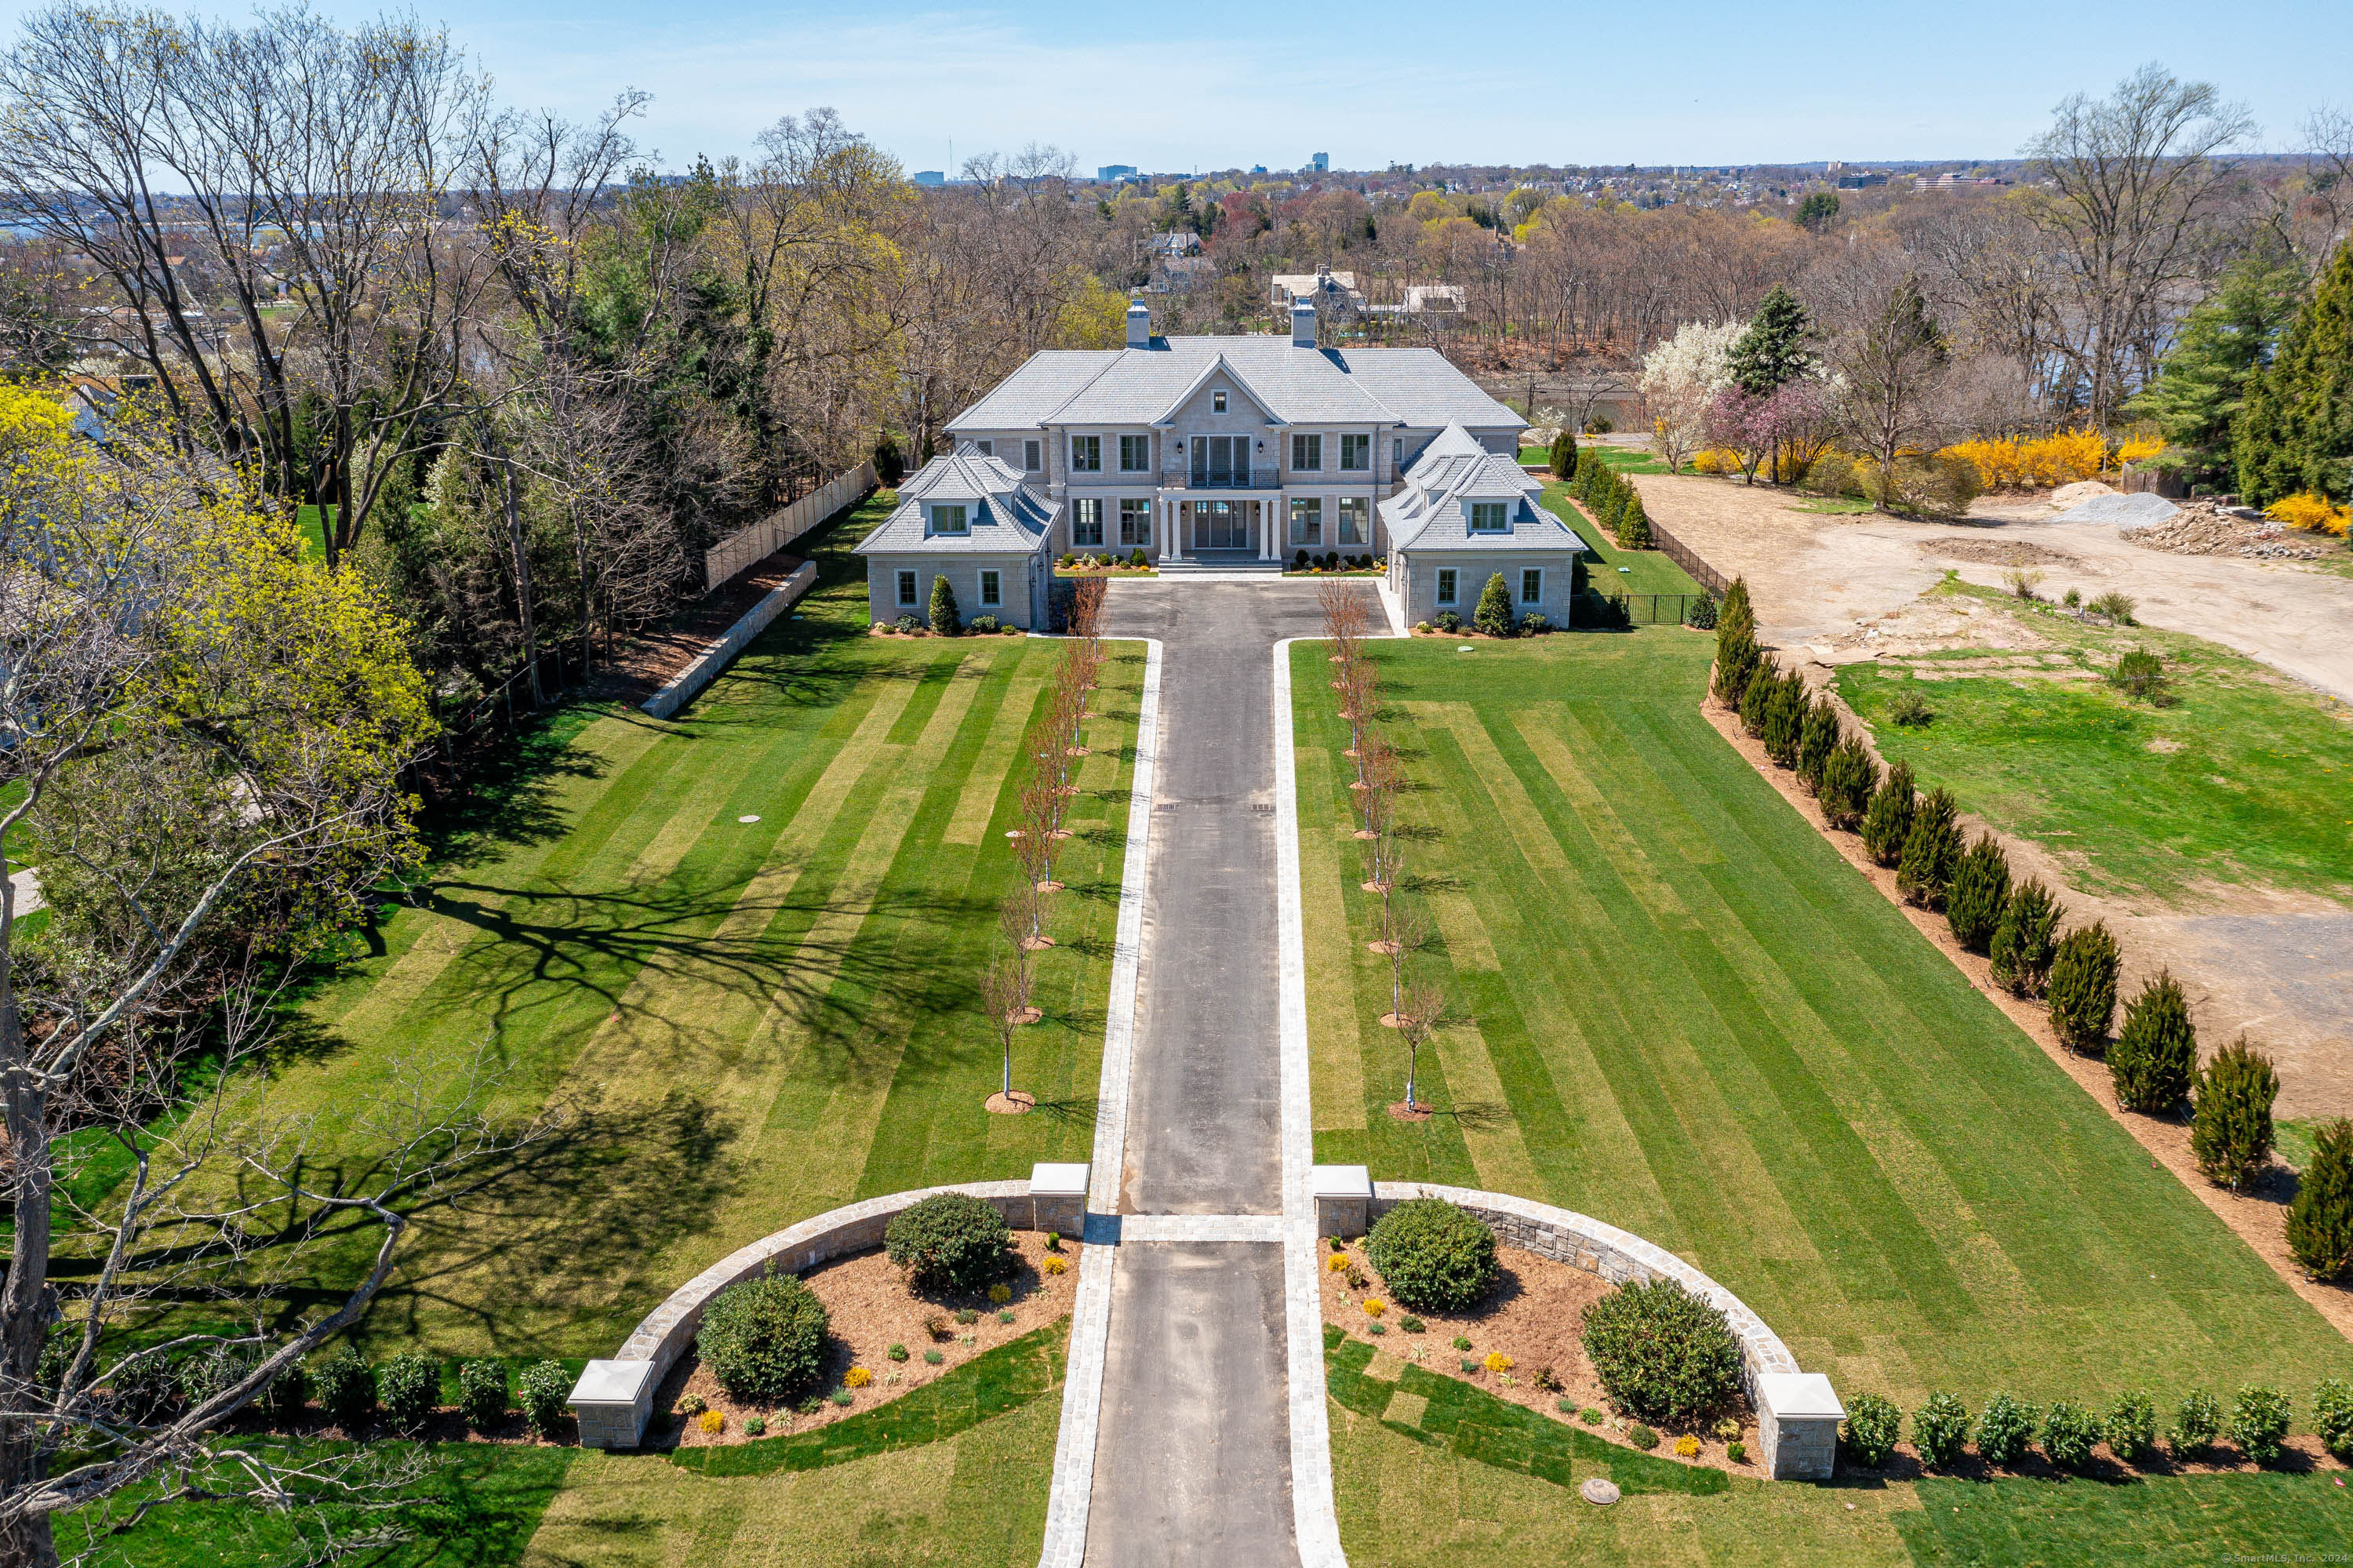 Property for Sale at 78 Long Neck Point Road, Darien, Connecticut - Bedrooms: 6 
Bathrooms: 9.5 
Rooms: 13  - $14,000,000